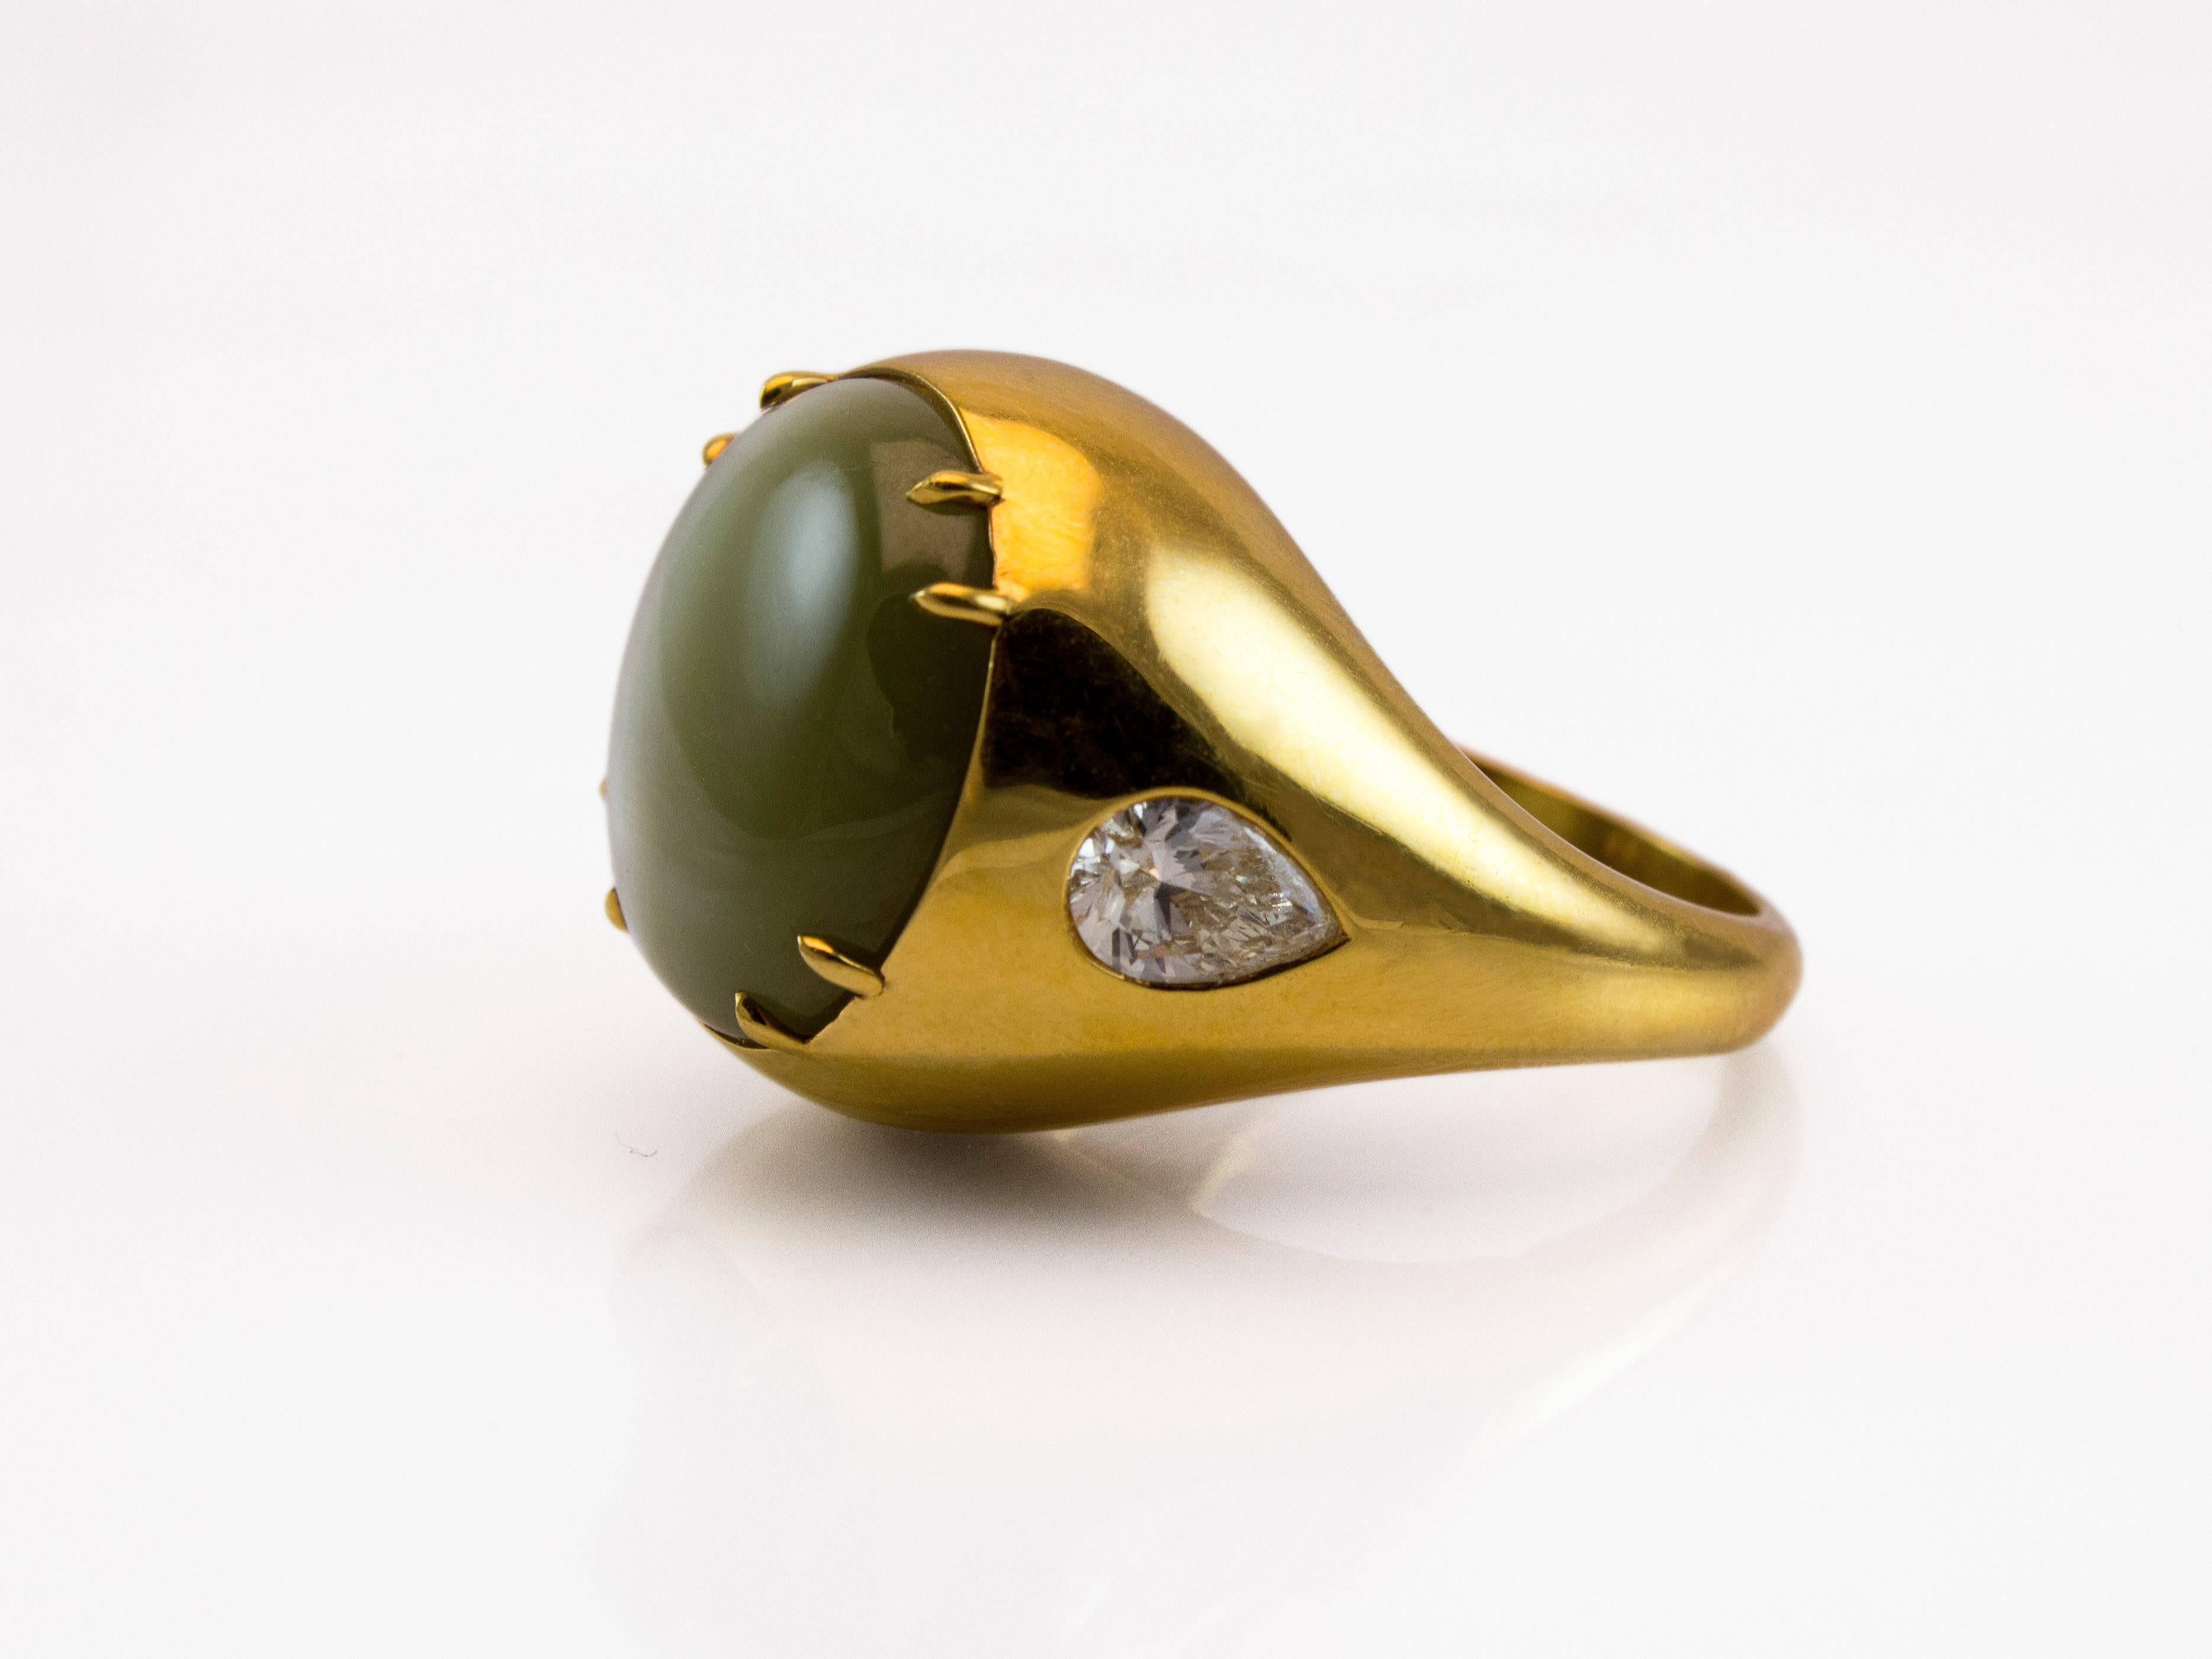 This cocktail ring features very rare large oval cabochon cat's eye chrysoberyl weighing 28.30 carat safely set in four prong 18K yellow gold. Accented by a pear shape diamond on either side weighing 1.03 carats total. The ring size is 8.25 US and